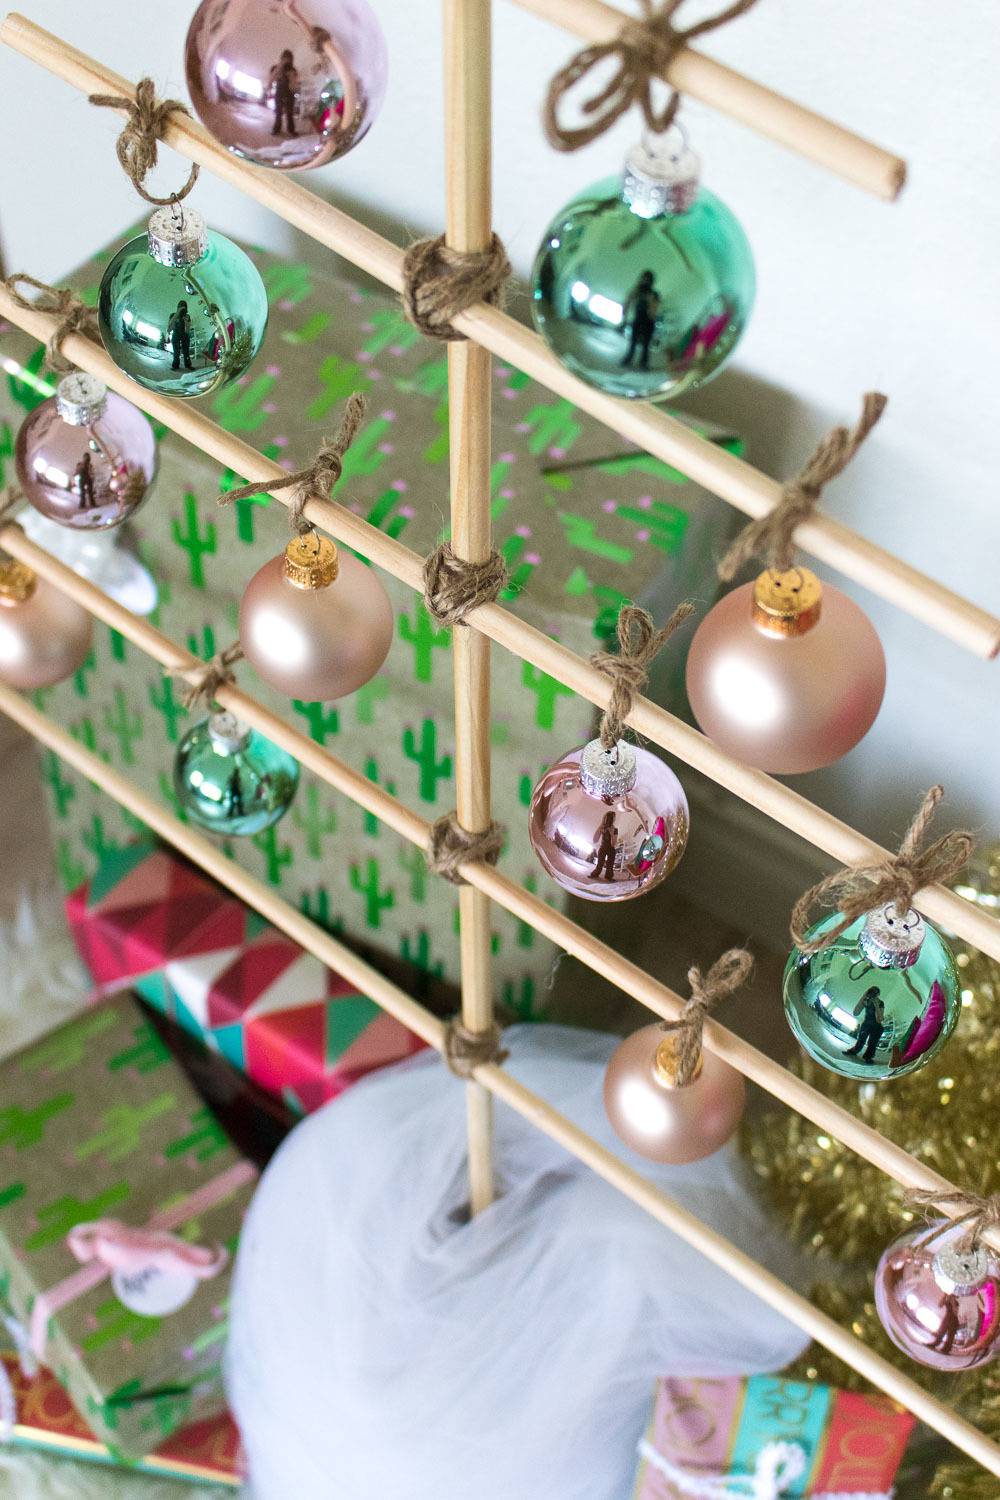 Wooden dowels made to look like a decorated christmas tree.